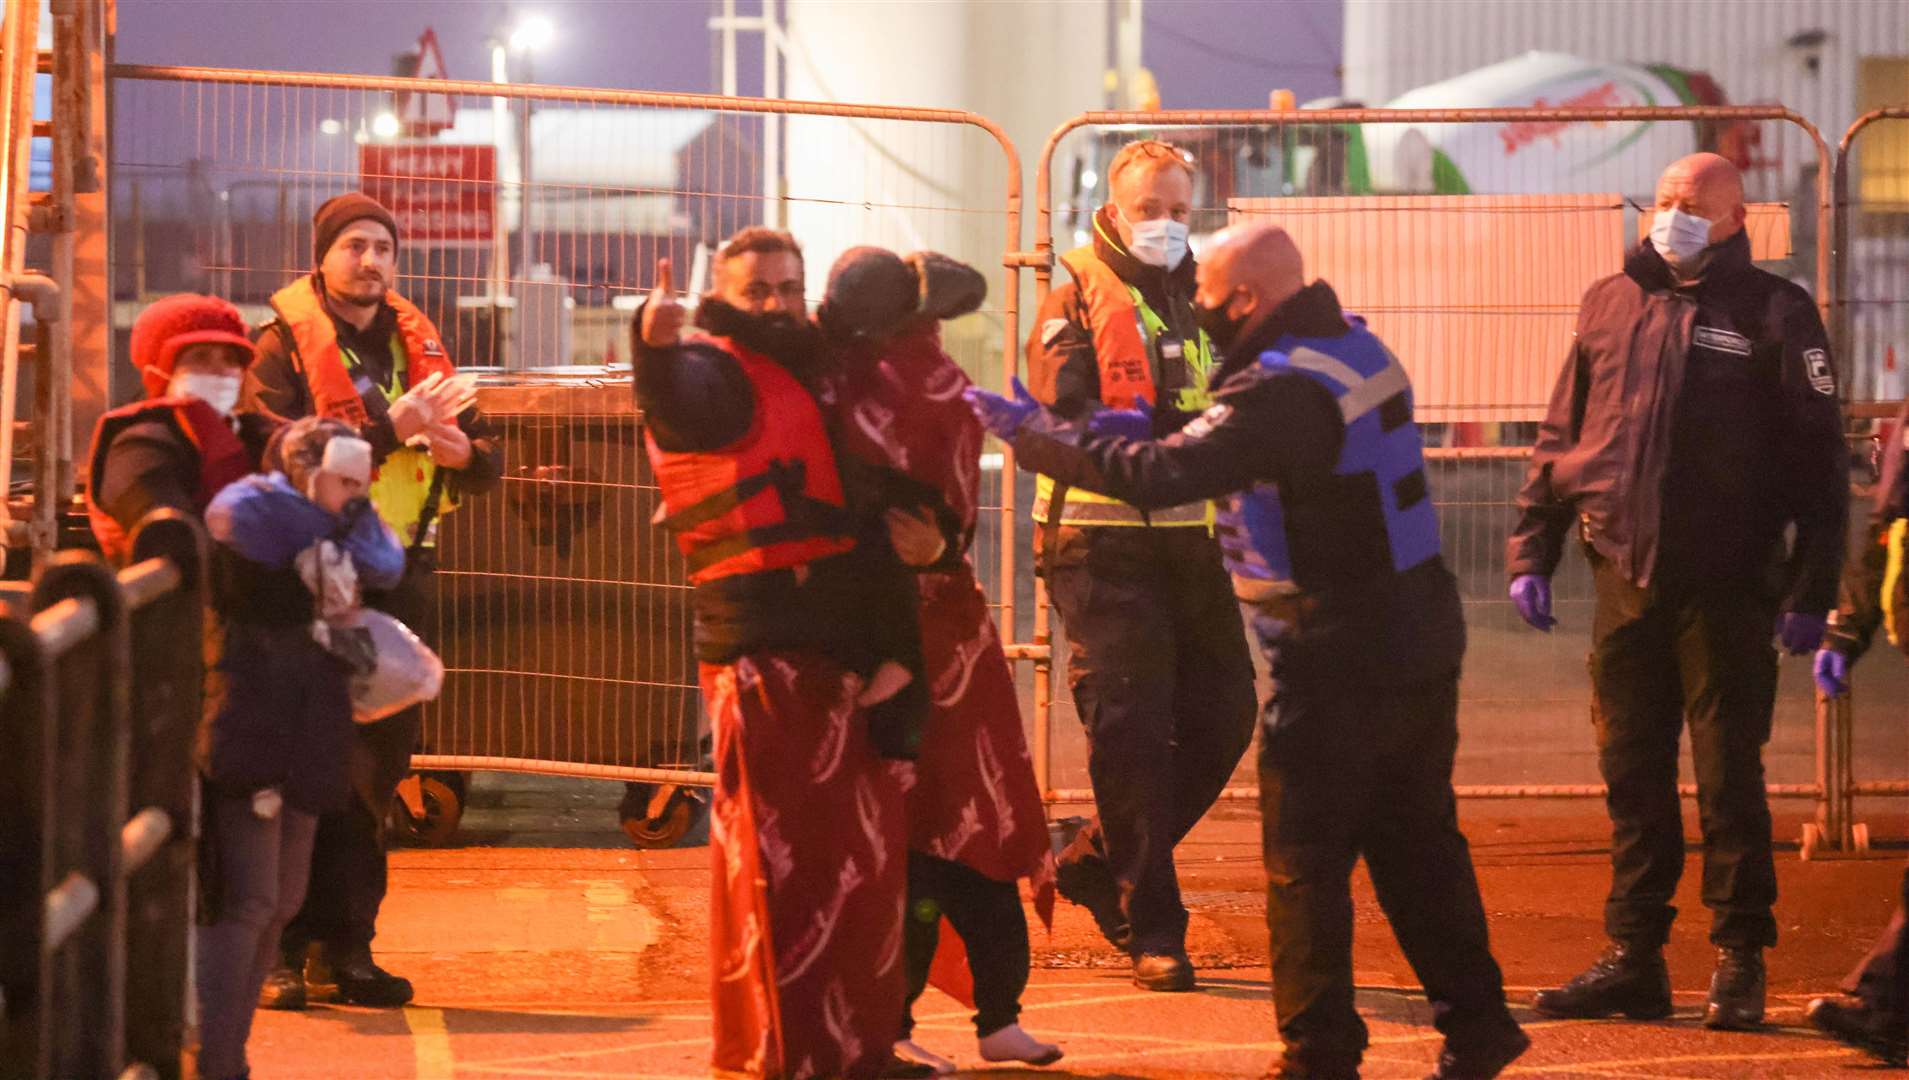 More migrants arrived at Dover later this afternoon aboard the BF Hurricane. Photo: UK News in Pictures